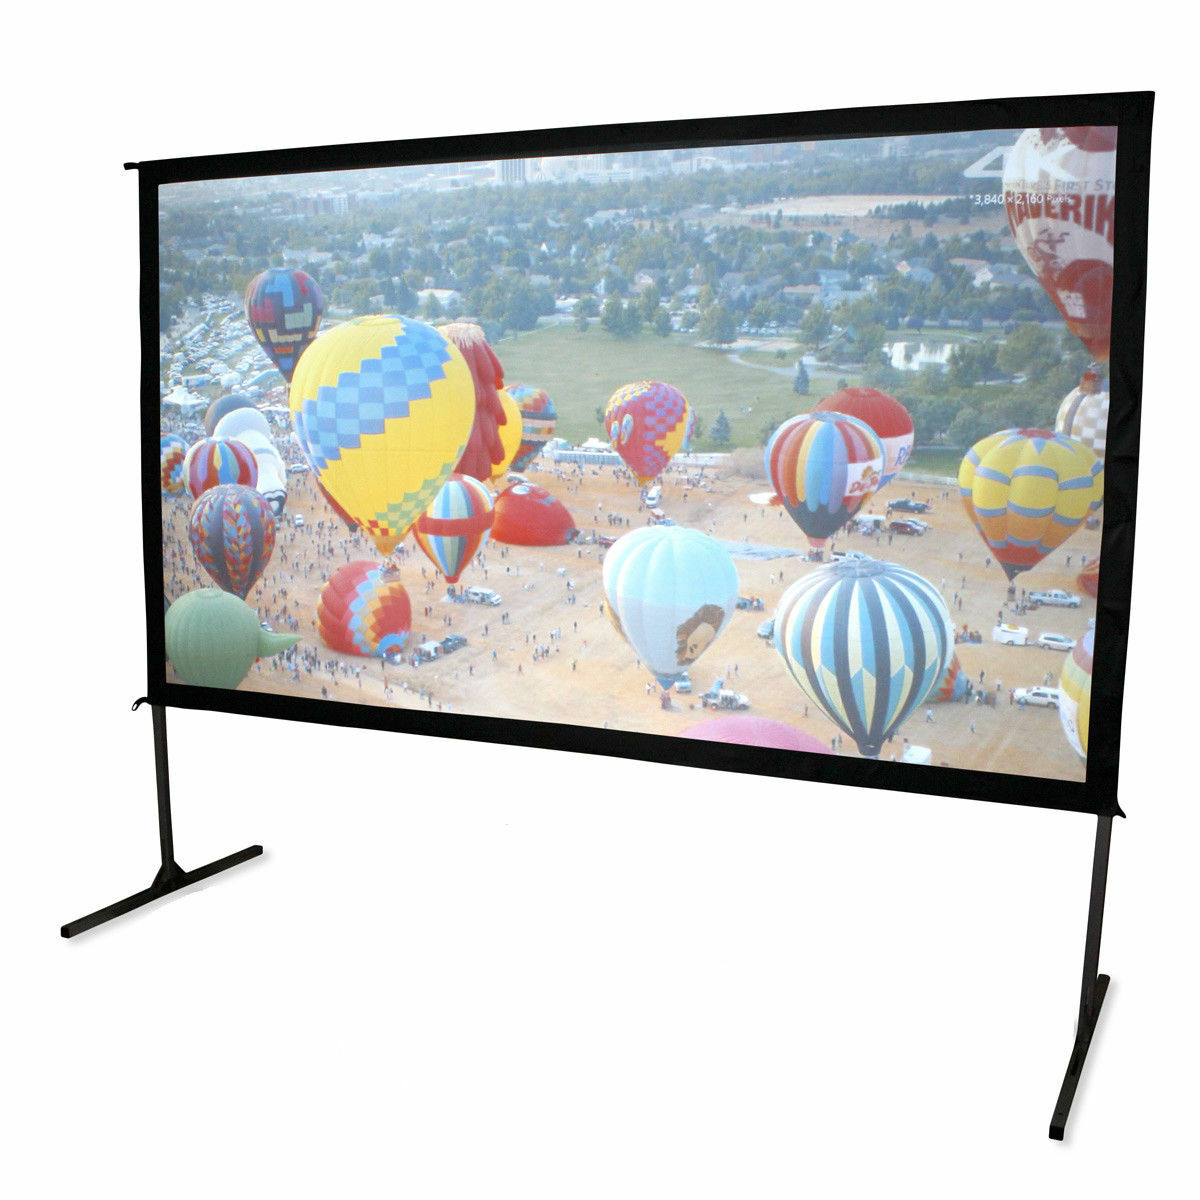 Elite Screens 100" 222x125cm Yard Master 2 Dual, Versatile, Outdoor/Indoor True Dual Front/Rear Projection Screen with Stand OMS100H2-DUAL /